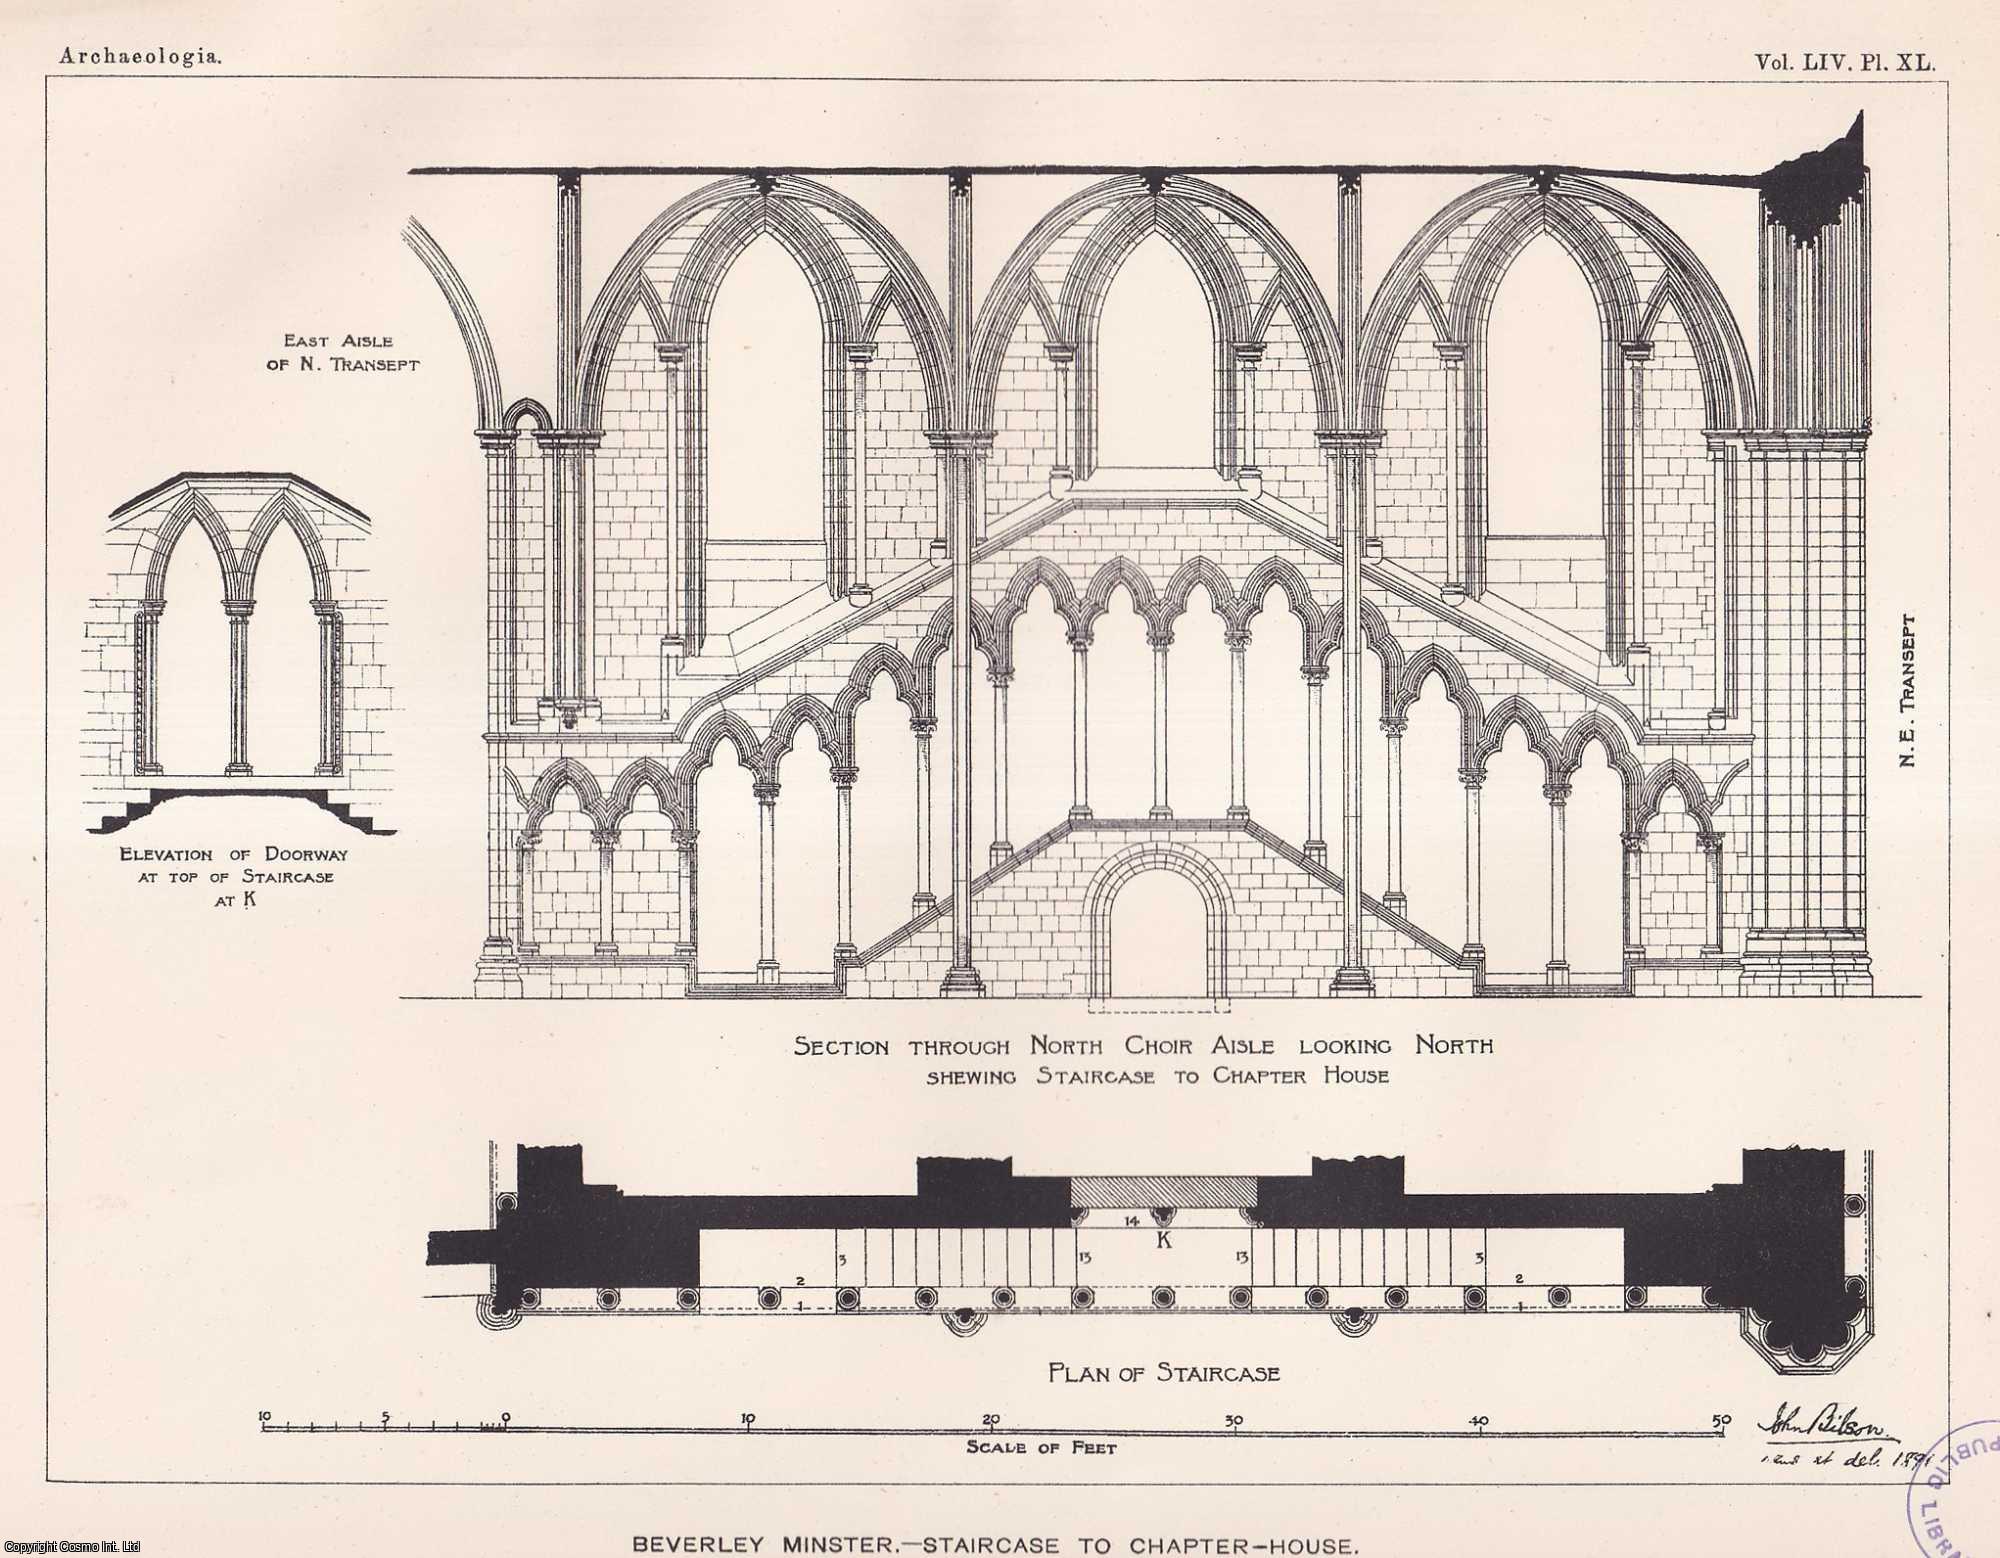 John Bilson, Esq. - On the Discovery of some Remains of the Chapter-house of Beverley Minster. An uncommon original article from the journal Archaeologia, 1895.